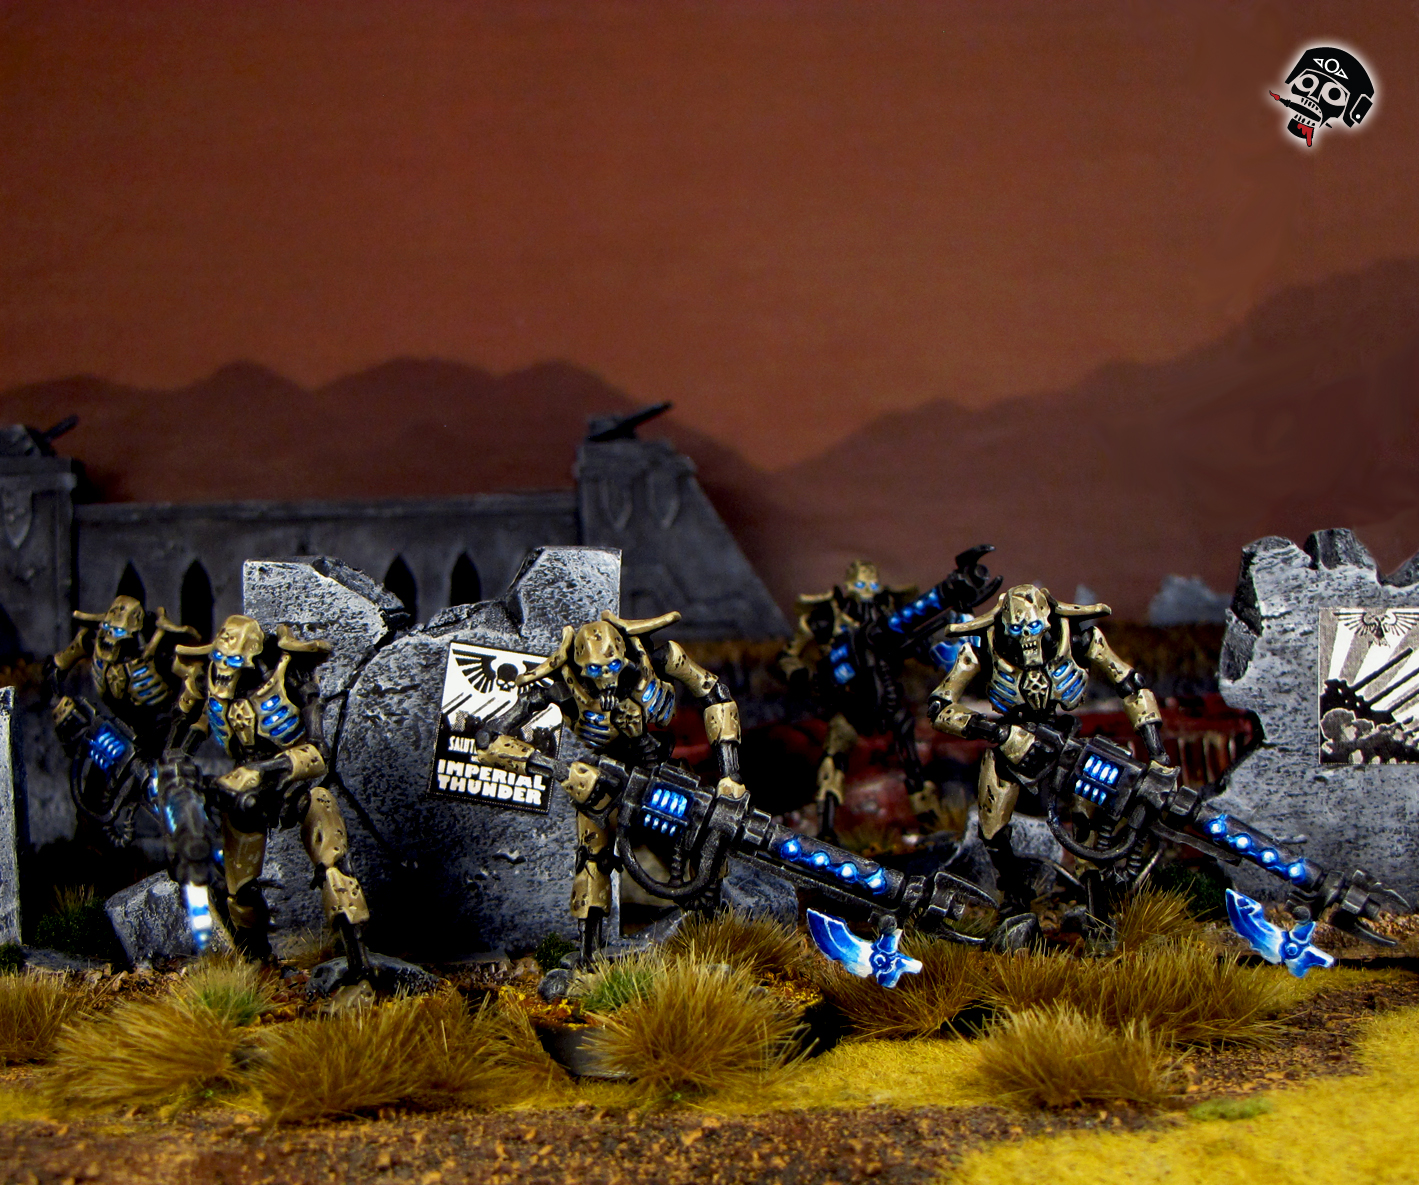 Necron warriors from Games Workshop painted by Neldoreth - An Hour of Wolves & Shattered Shields